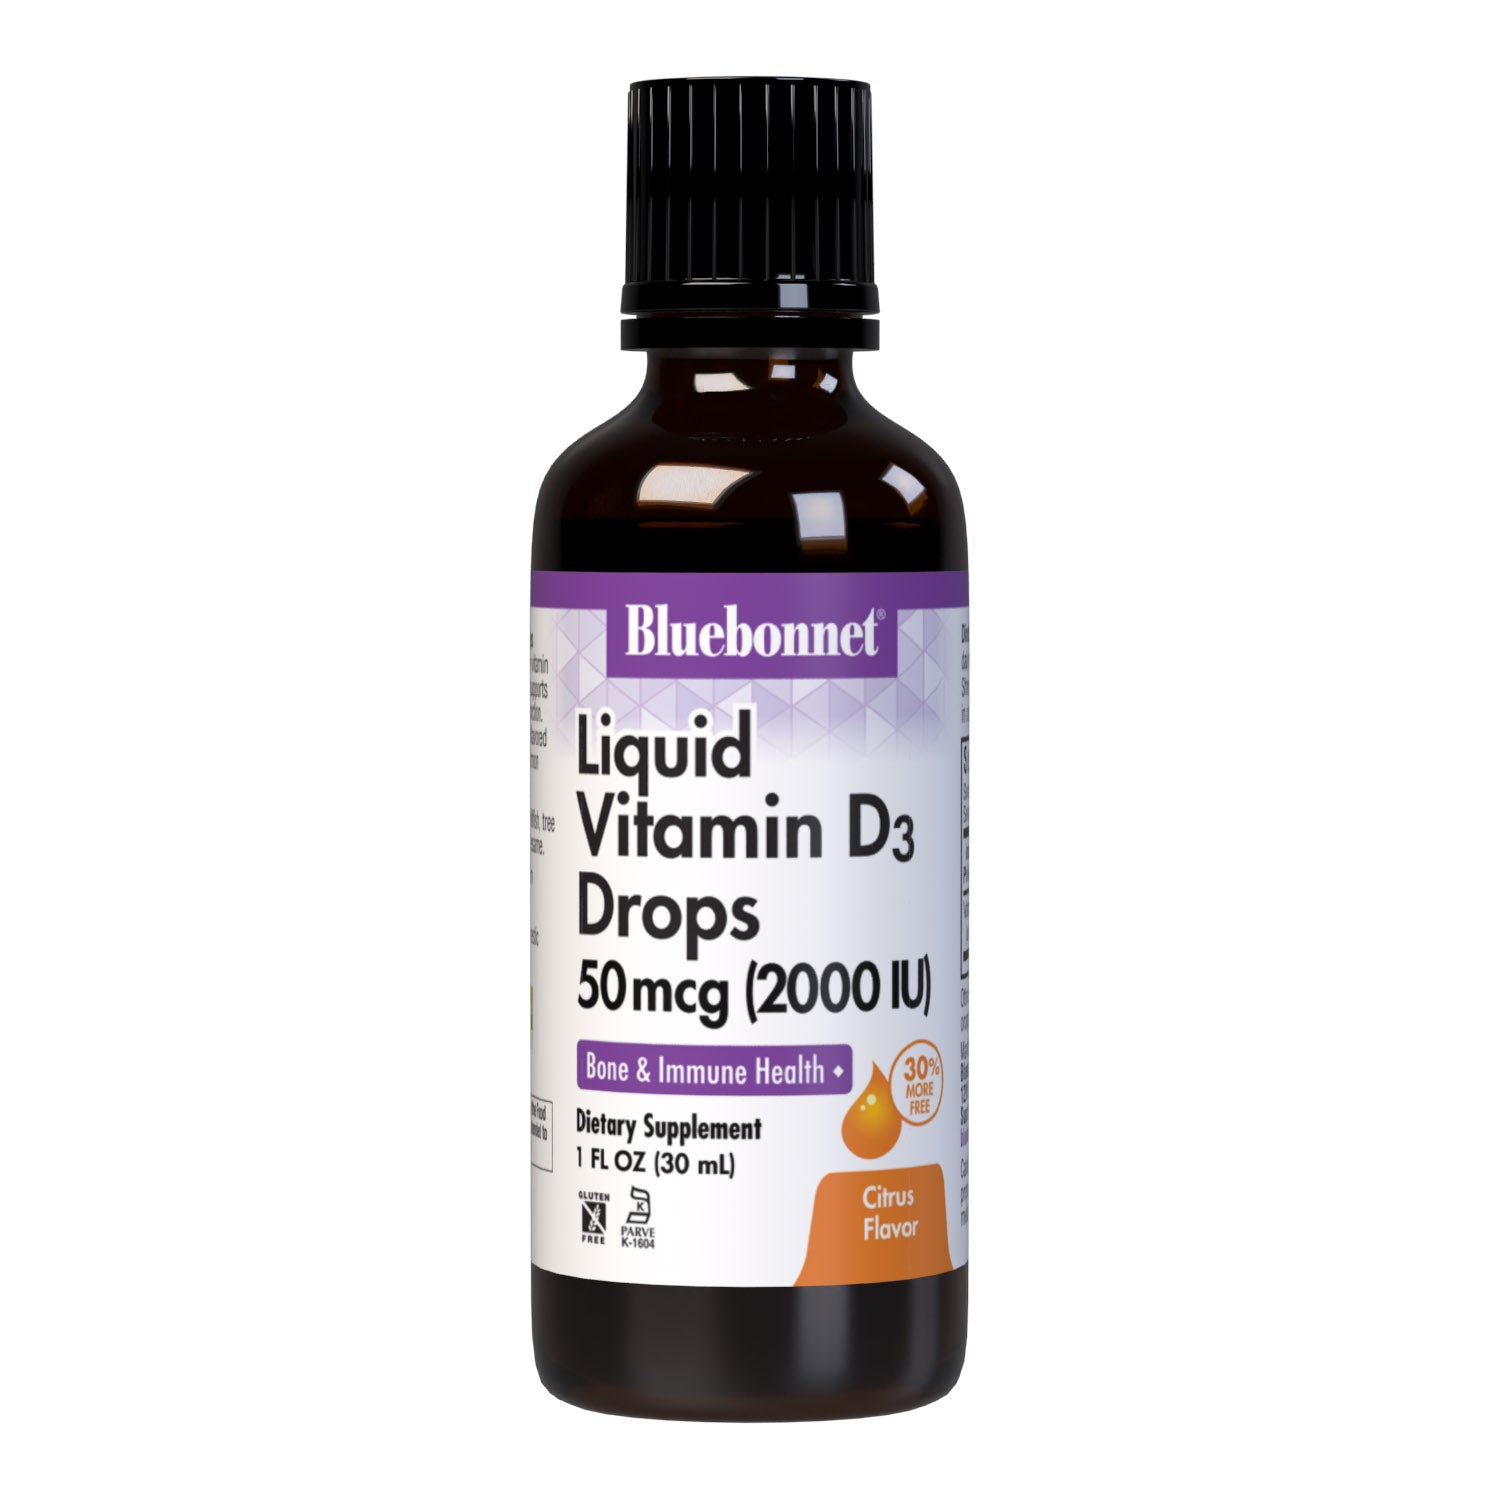 Bluebonnet’s Liquid Vitamin D3 Drops 2000 IU (50 mcg) are formulated with vitamin D3 (cholecalciferol) from lanolin for strong healthy bones. Each drop of this sunshine vitamin is flavored using a hint of orange and lemon essential oils. #size_1 fl oz